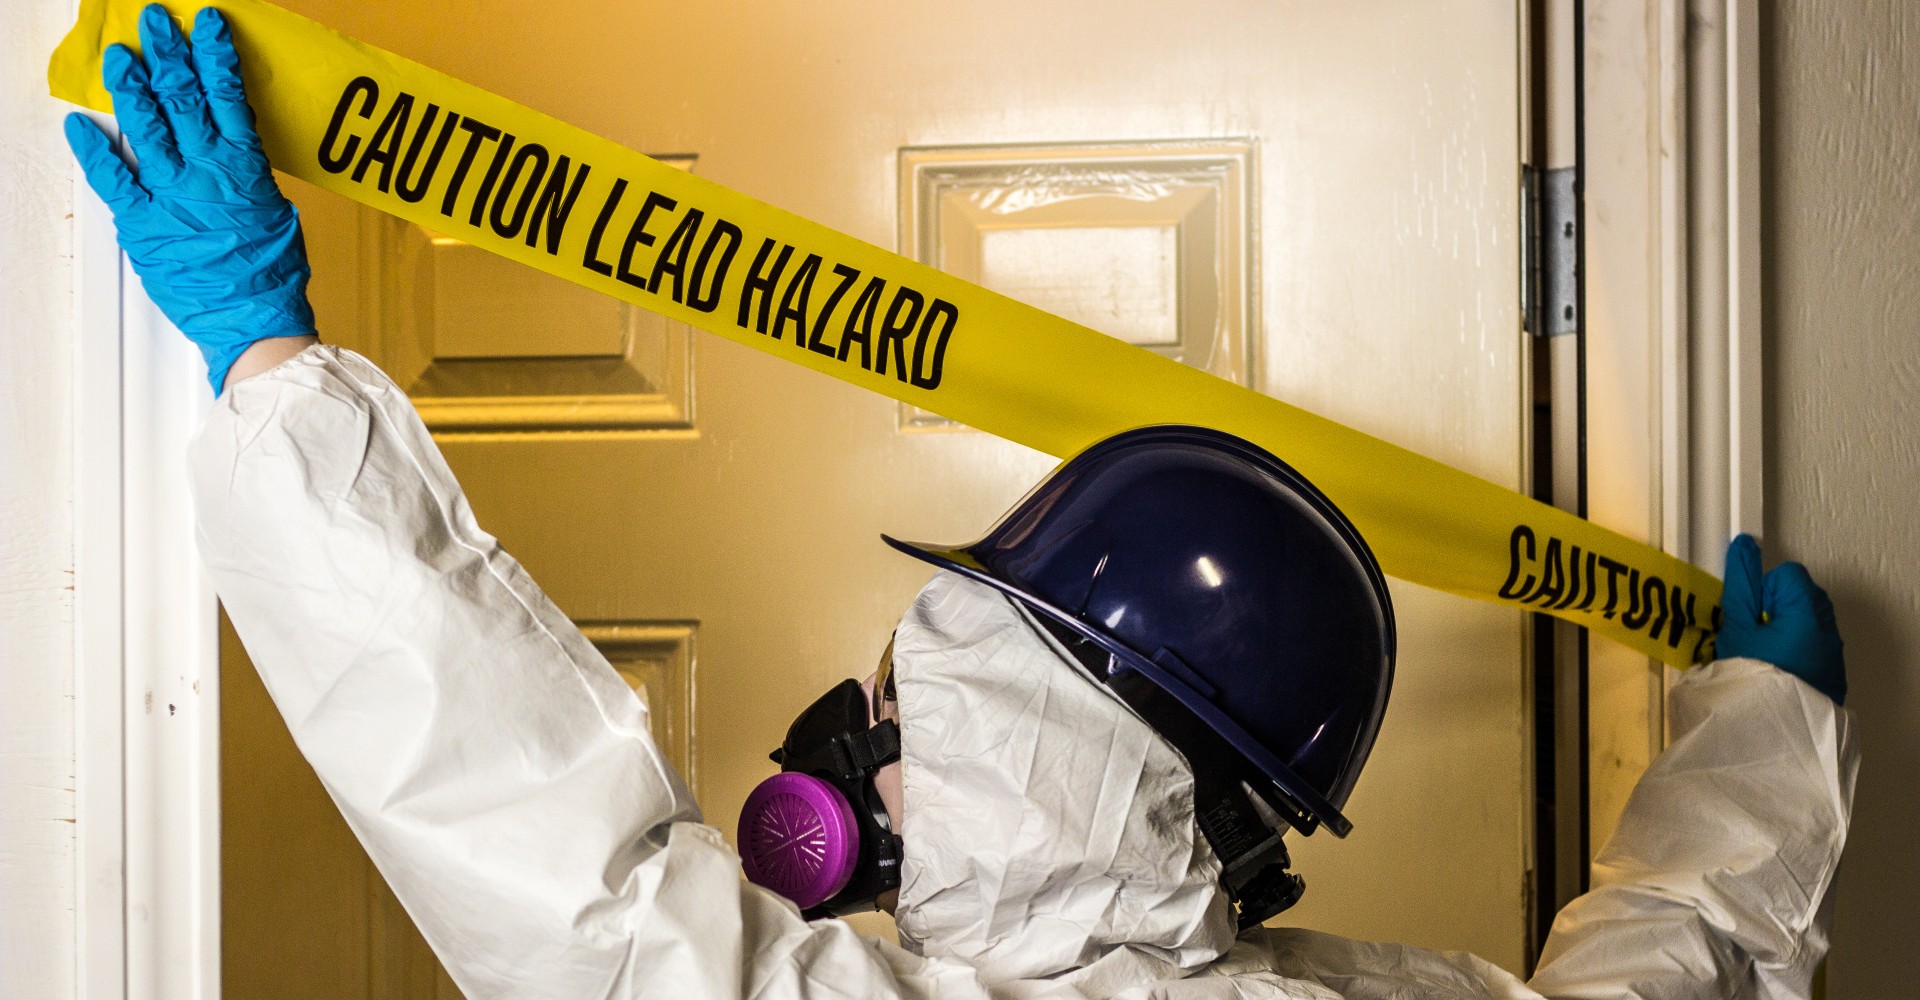 Mold, Lead and Asbestos Abateement